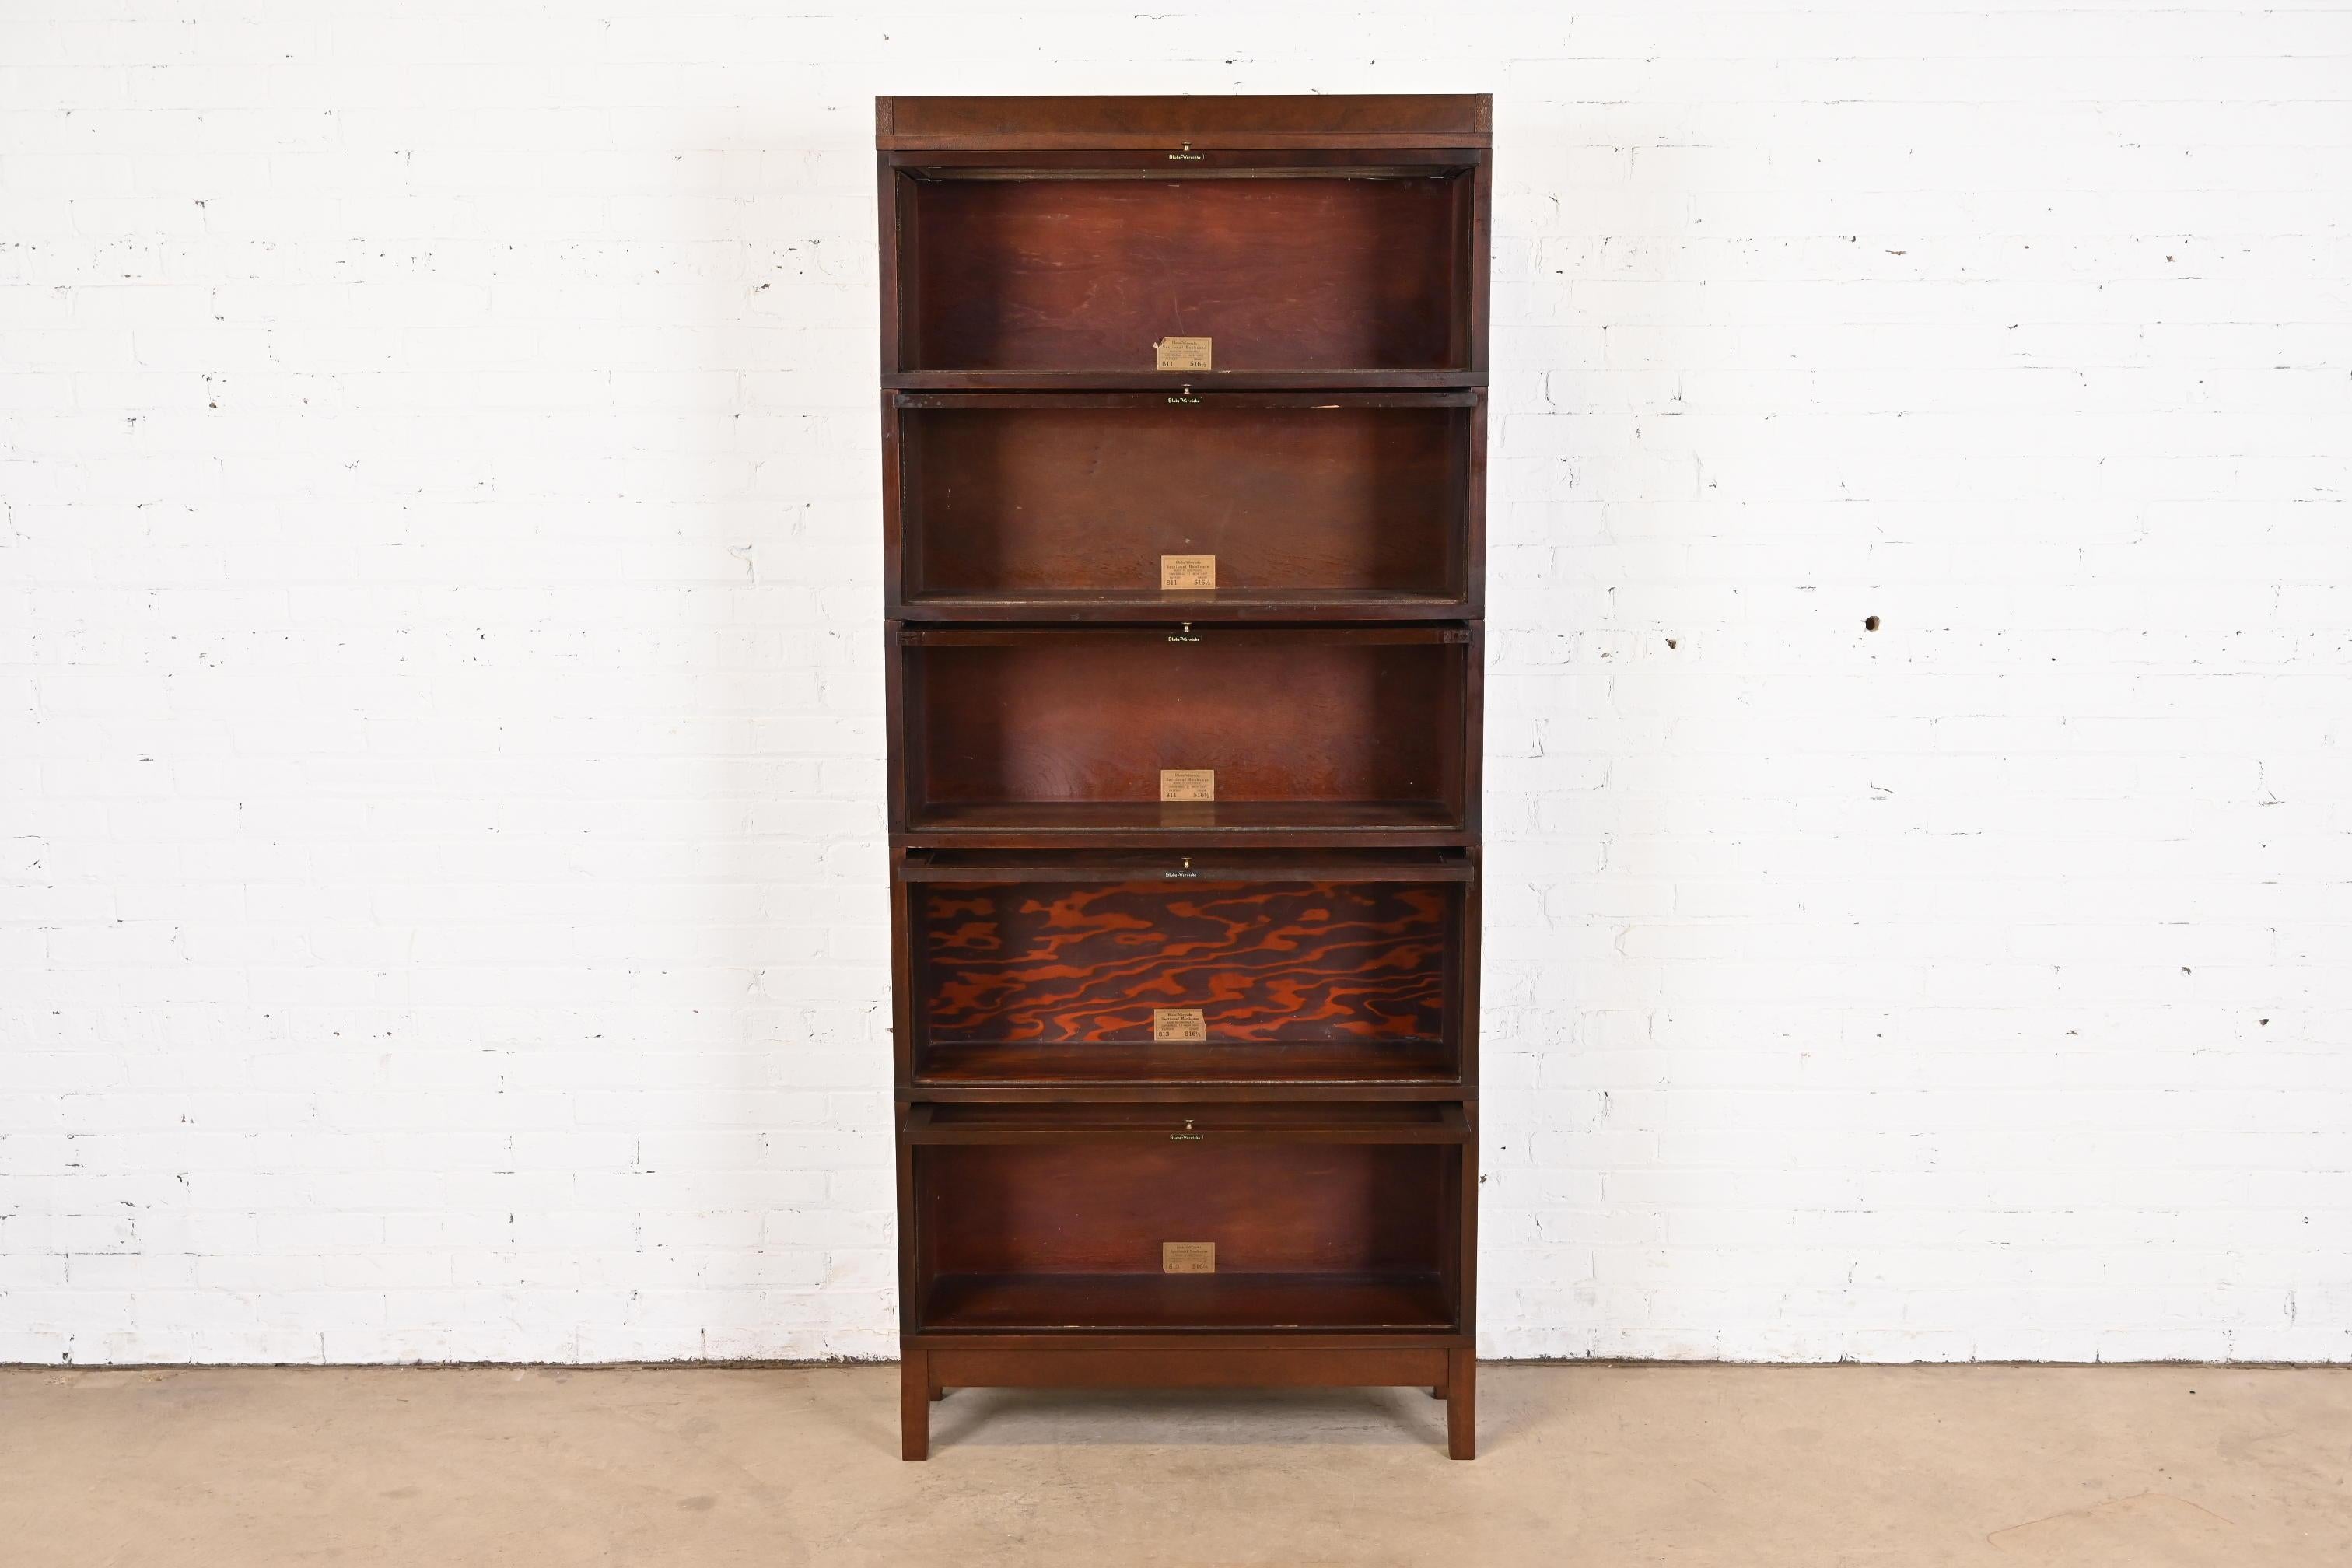 Globe Wernicke Arts & Crafts Mahogany Five-Stack Barrister Bookcase, Circa 1890s In Good Condition For Sale In South Bend, IN